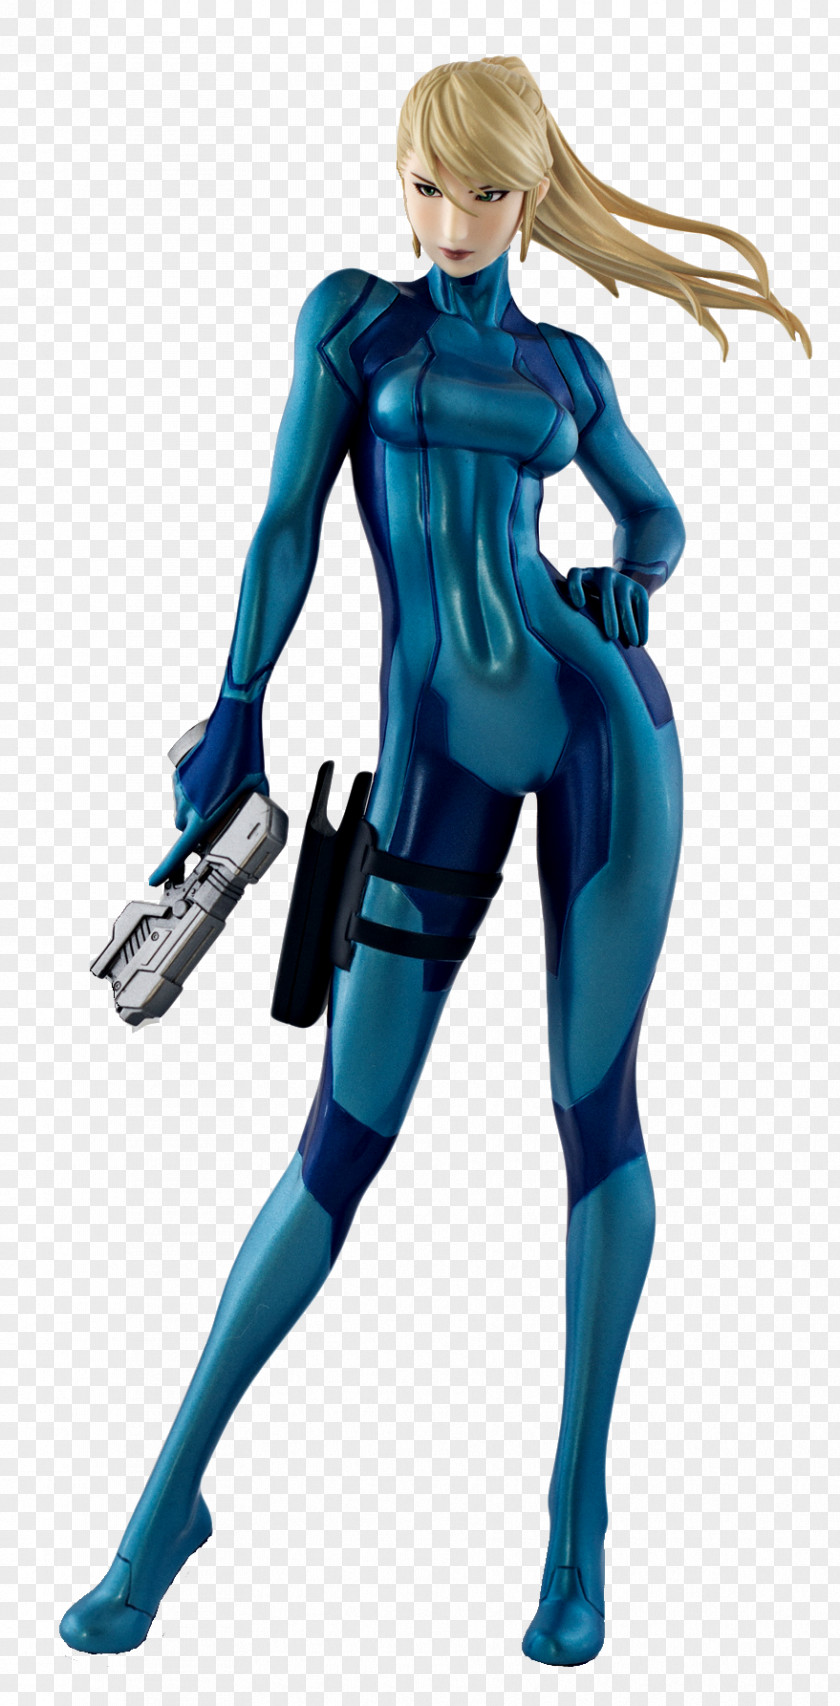 Female Suit Super Metroid Smash Bros. For Nintendo 3DS And Wii U Metroid: Zero Mission Brawl PNG